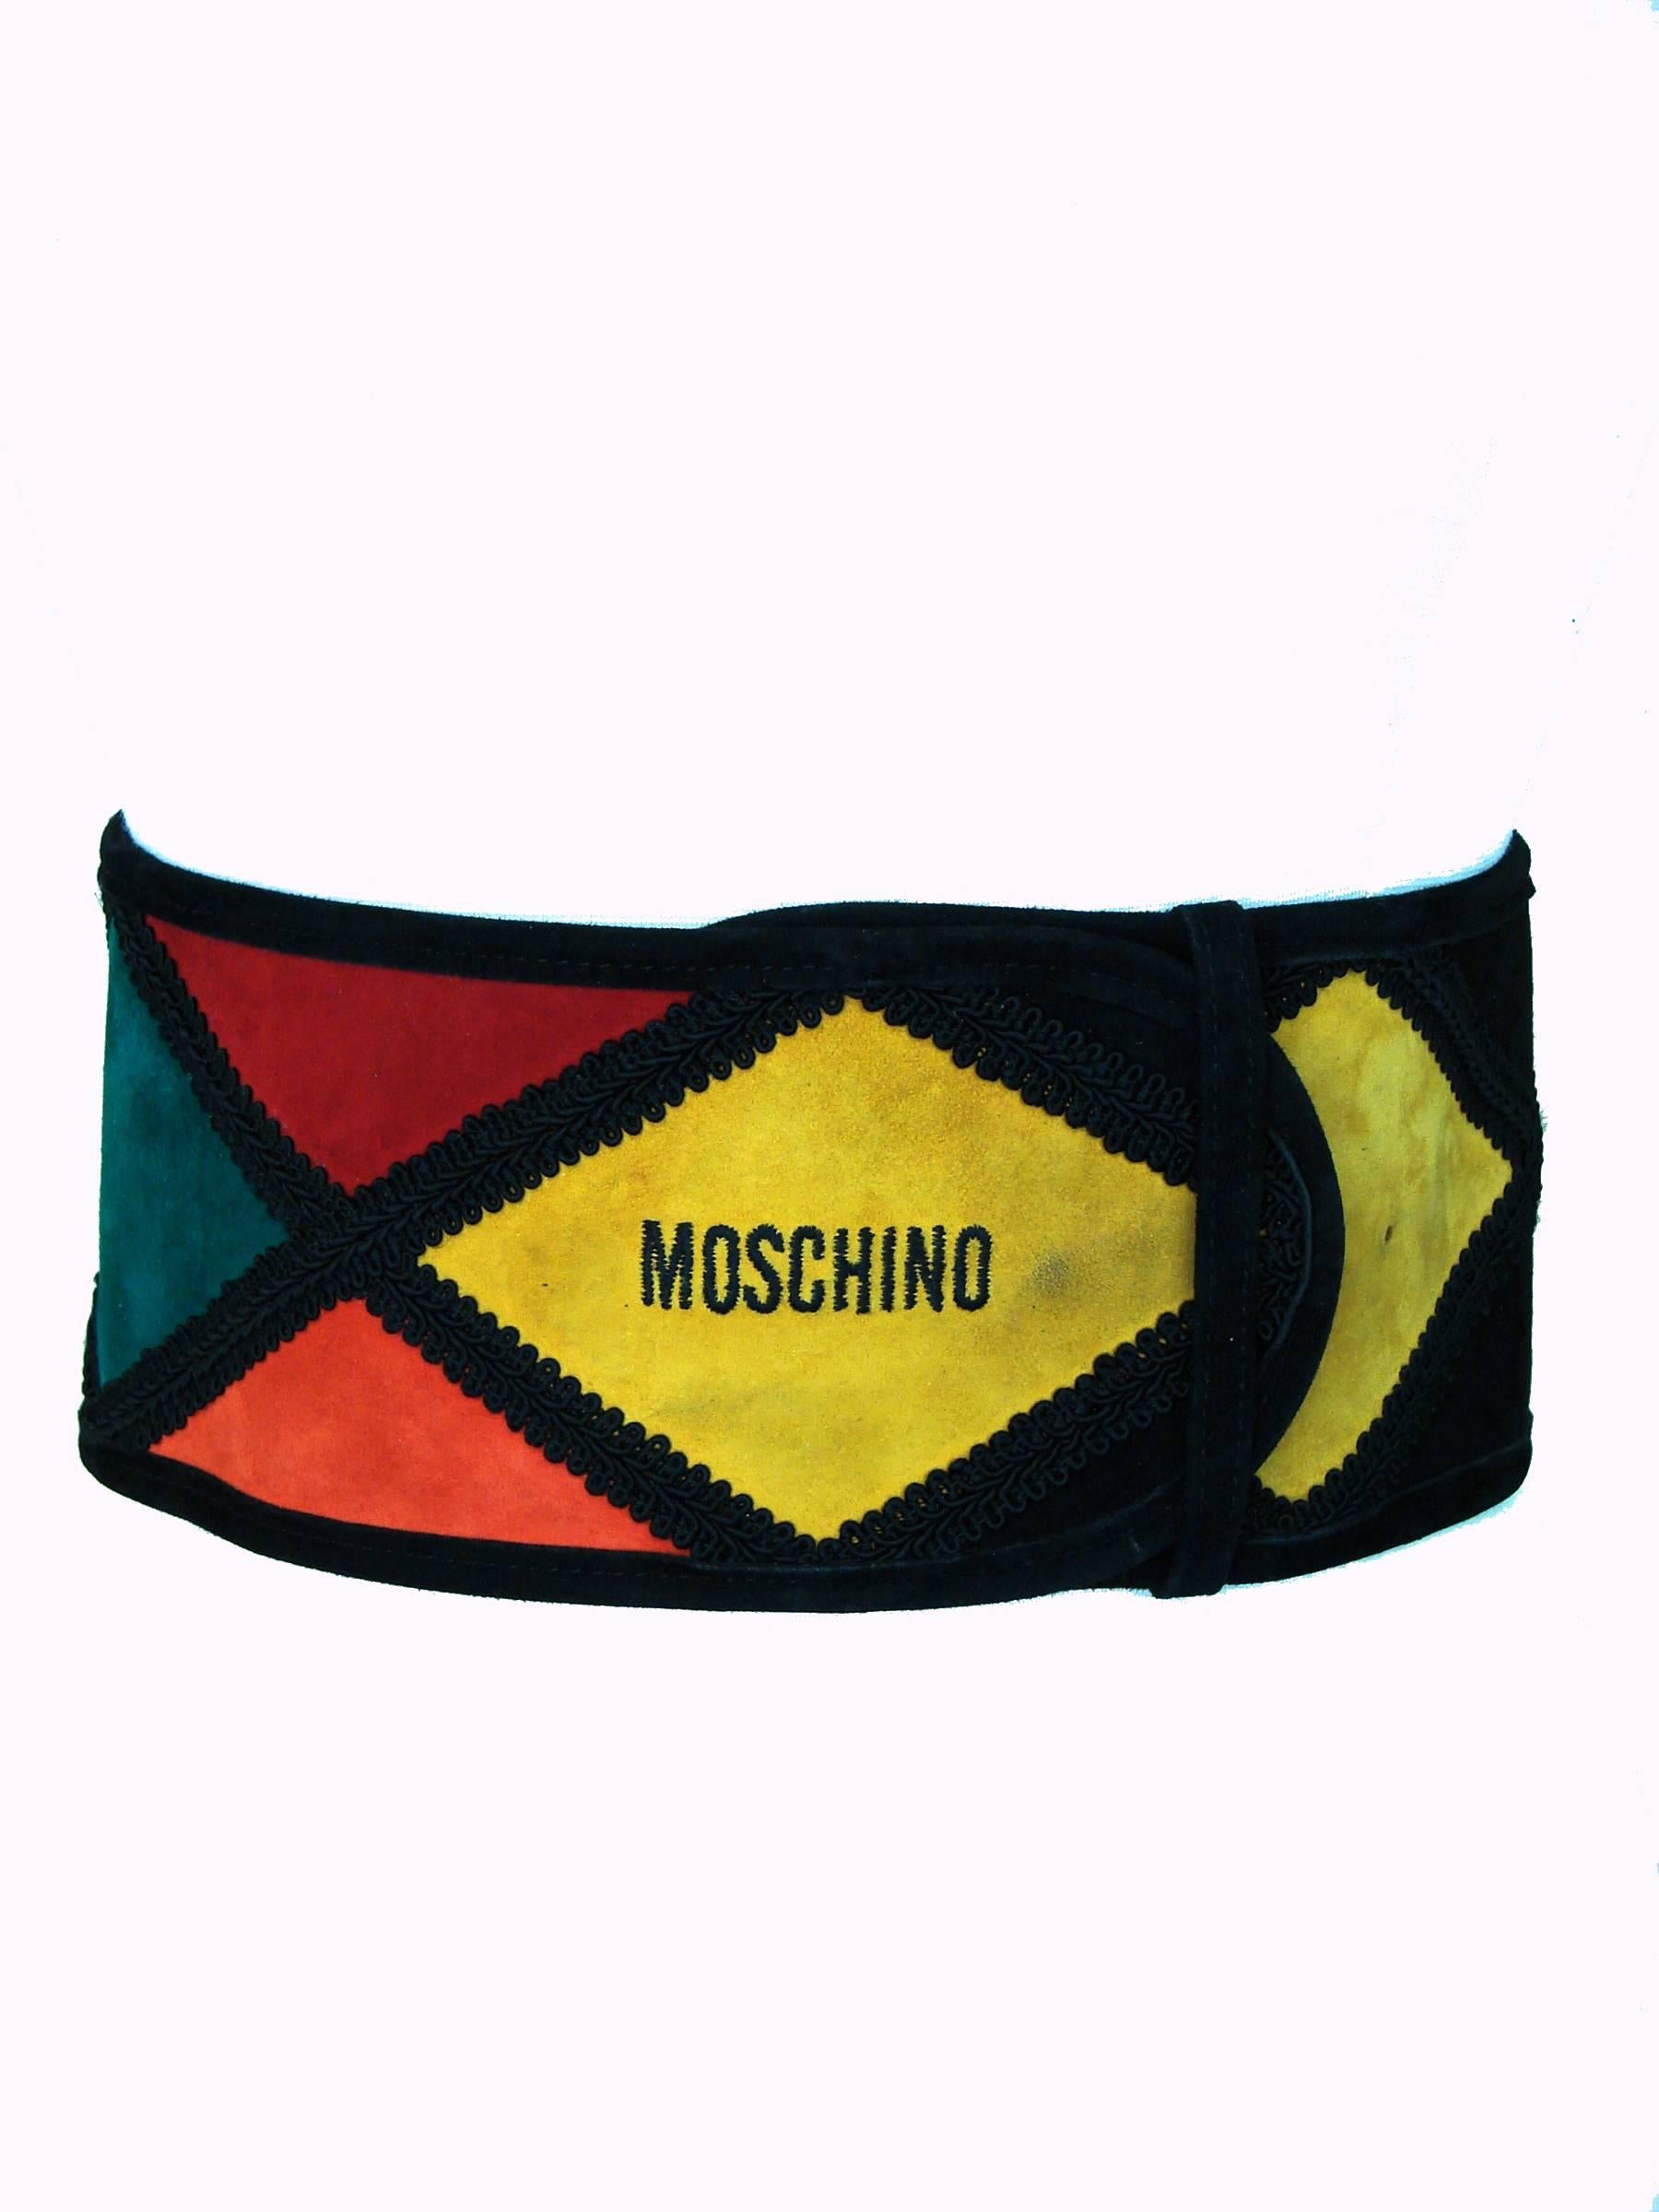 An incredible wide suede leather belt from Moschino by Redwall Italy from the 1980s. In excellent condition, with some minor rubs here and there on the suede. Measures 4.5